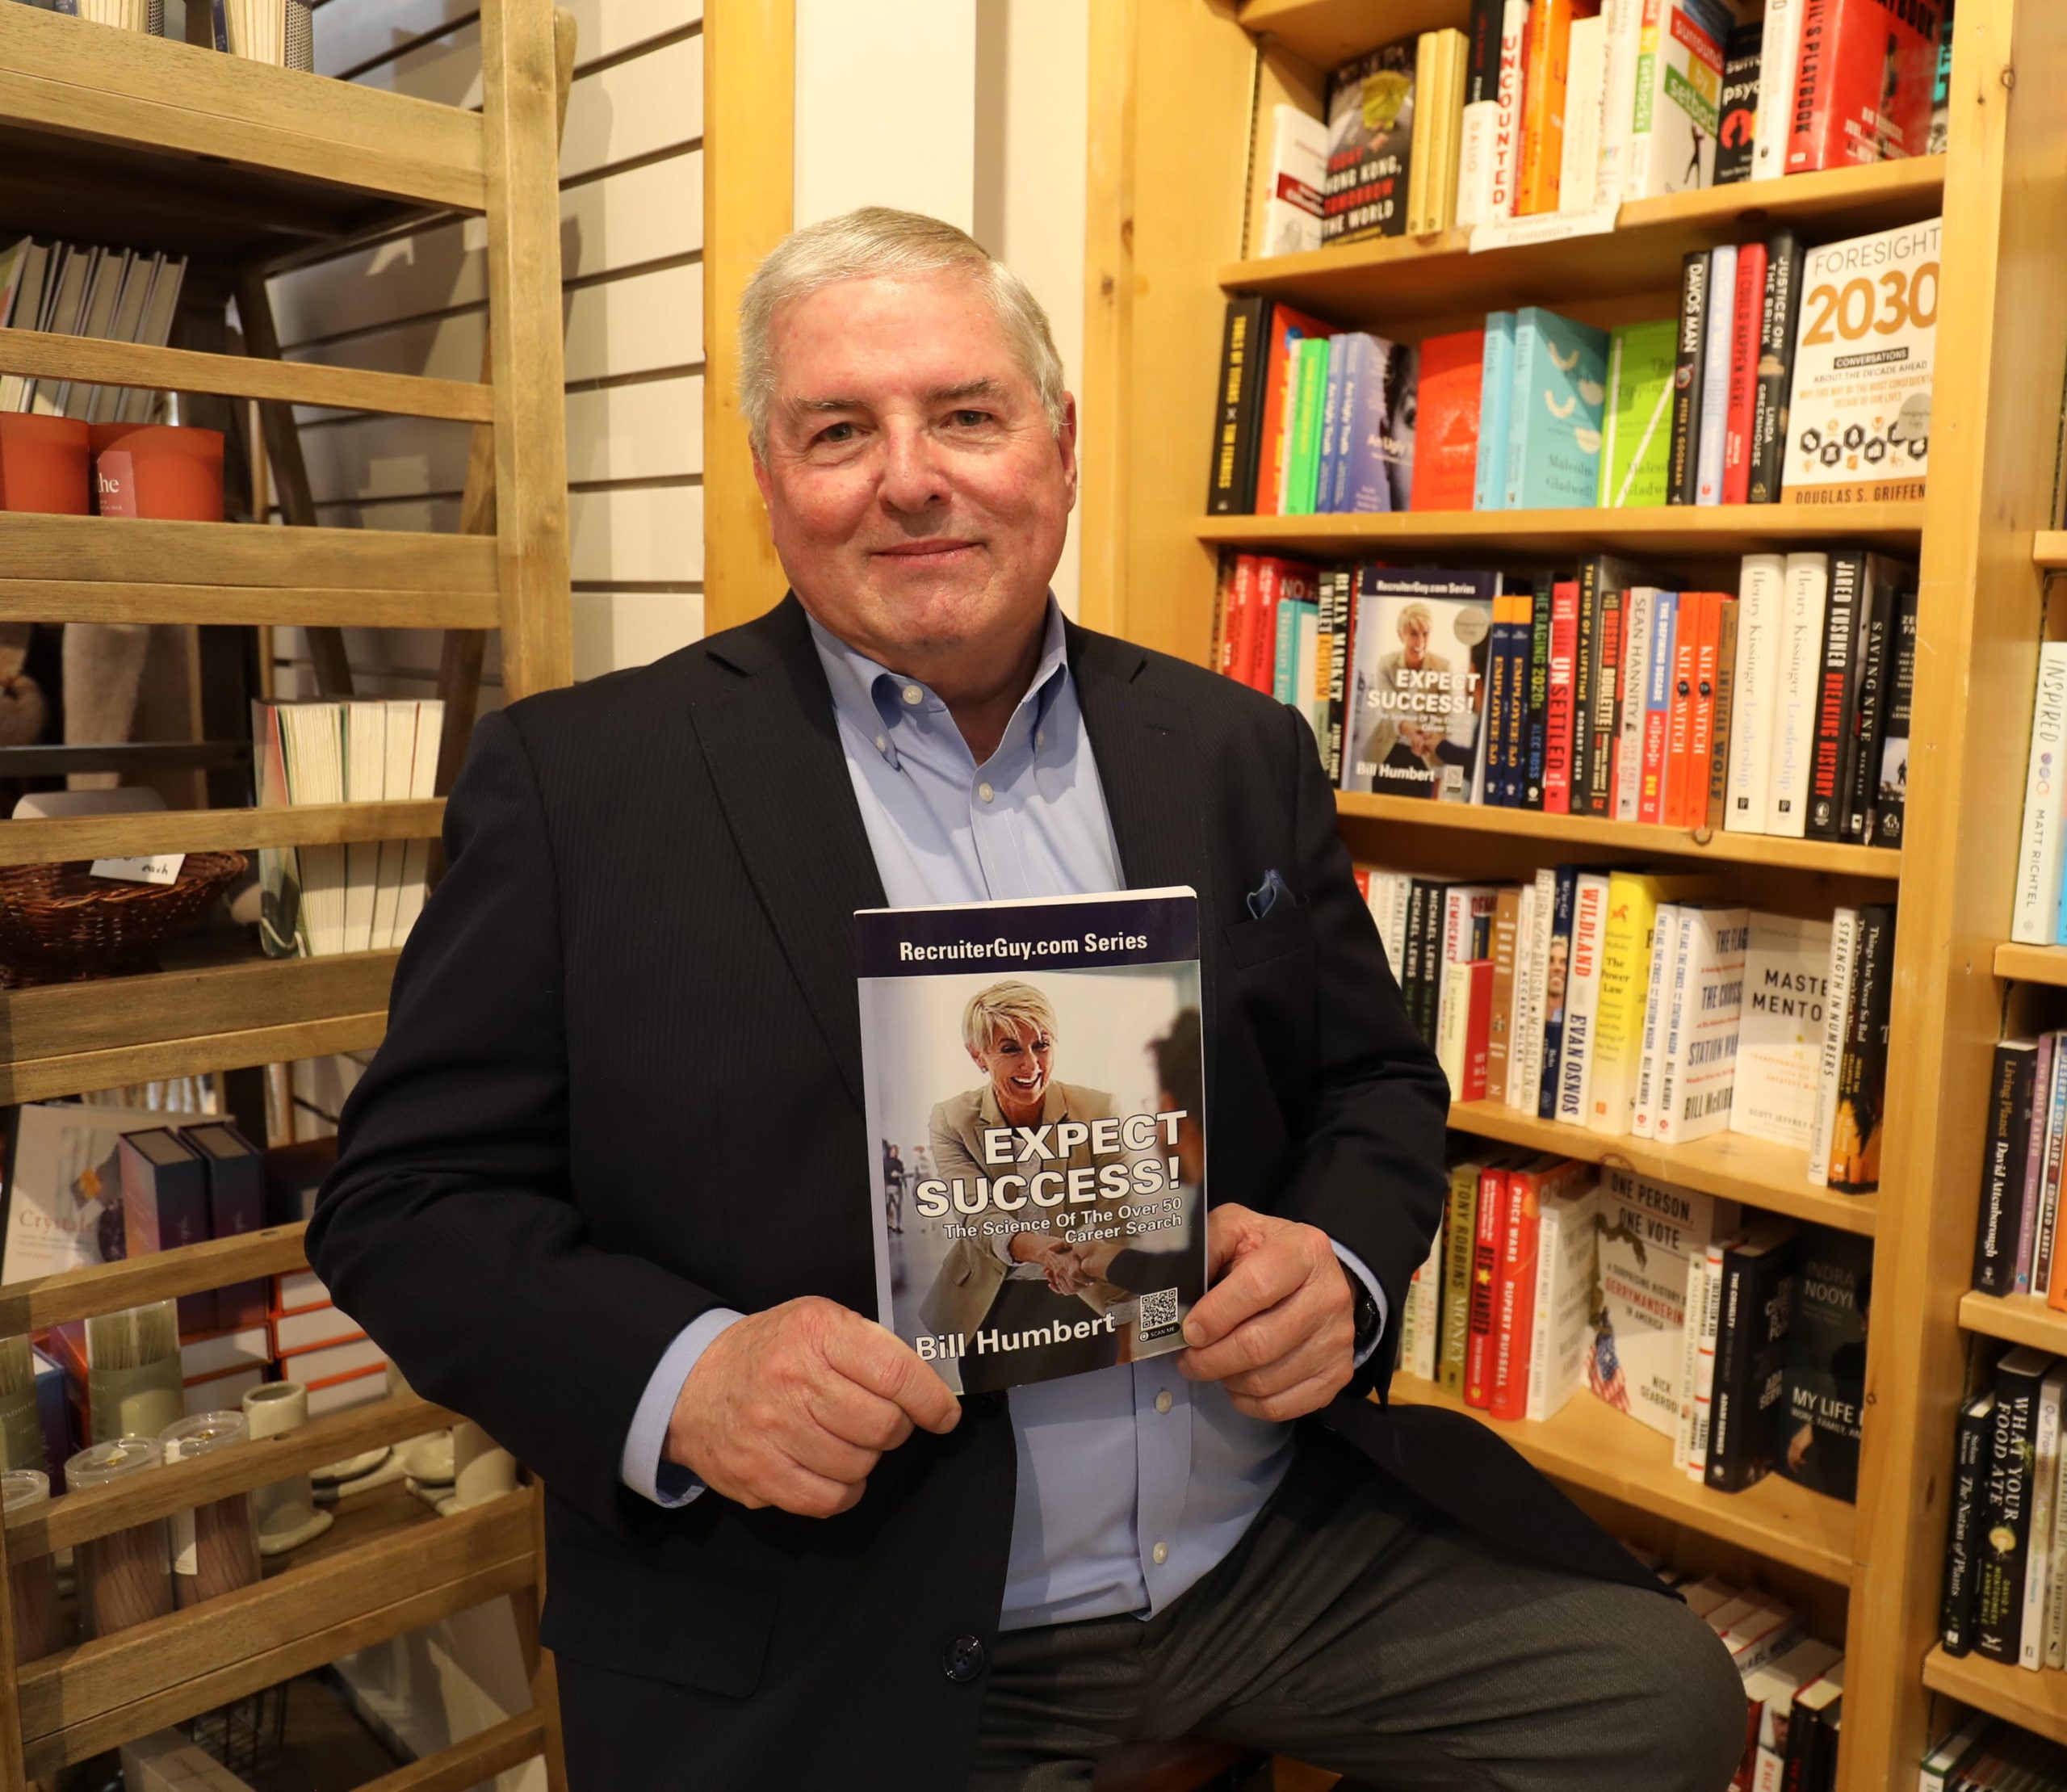 Talent Attraction Consultatant at Dolly's Bookstore in Park City, Utah with his book, Expect Success.